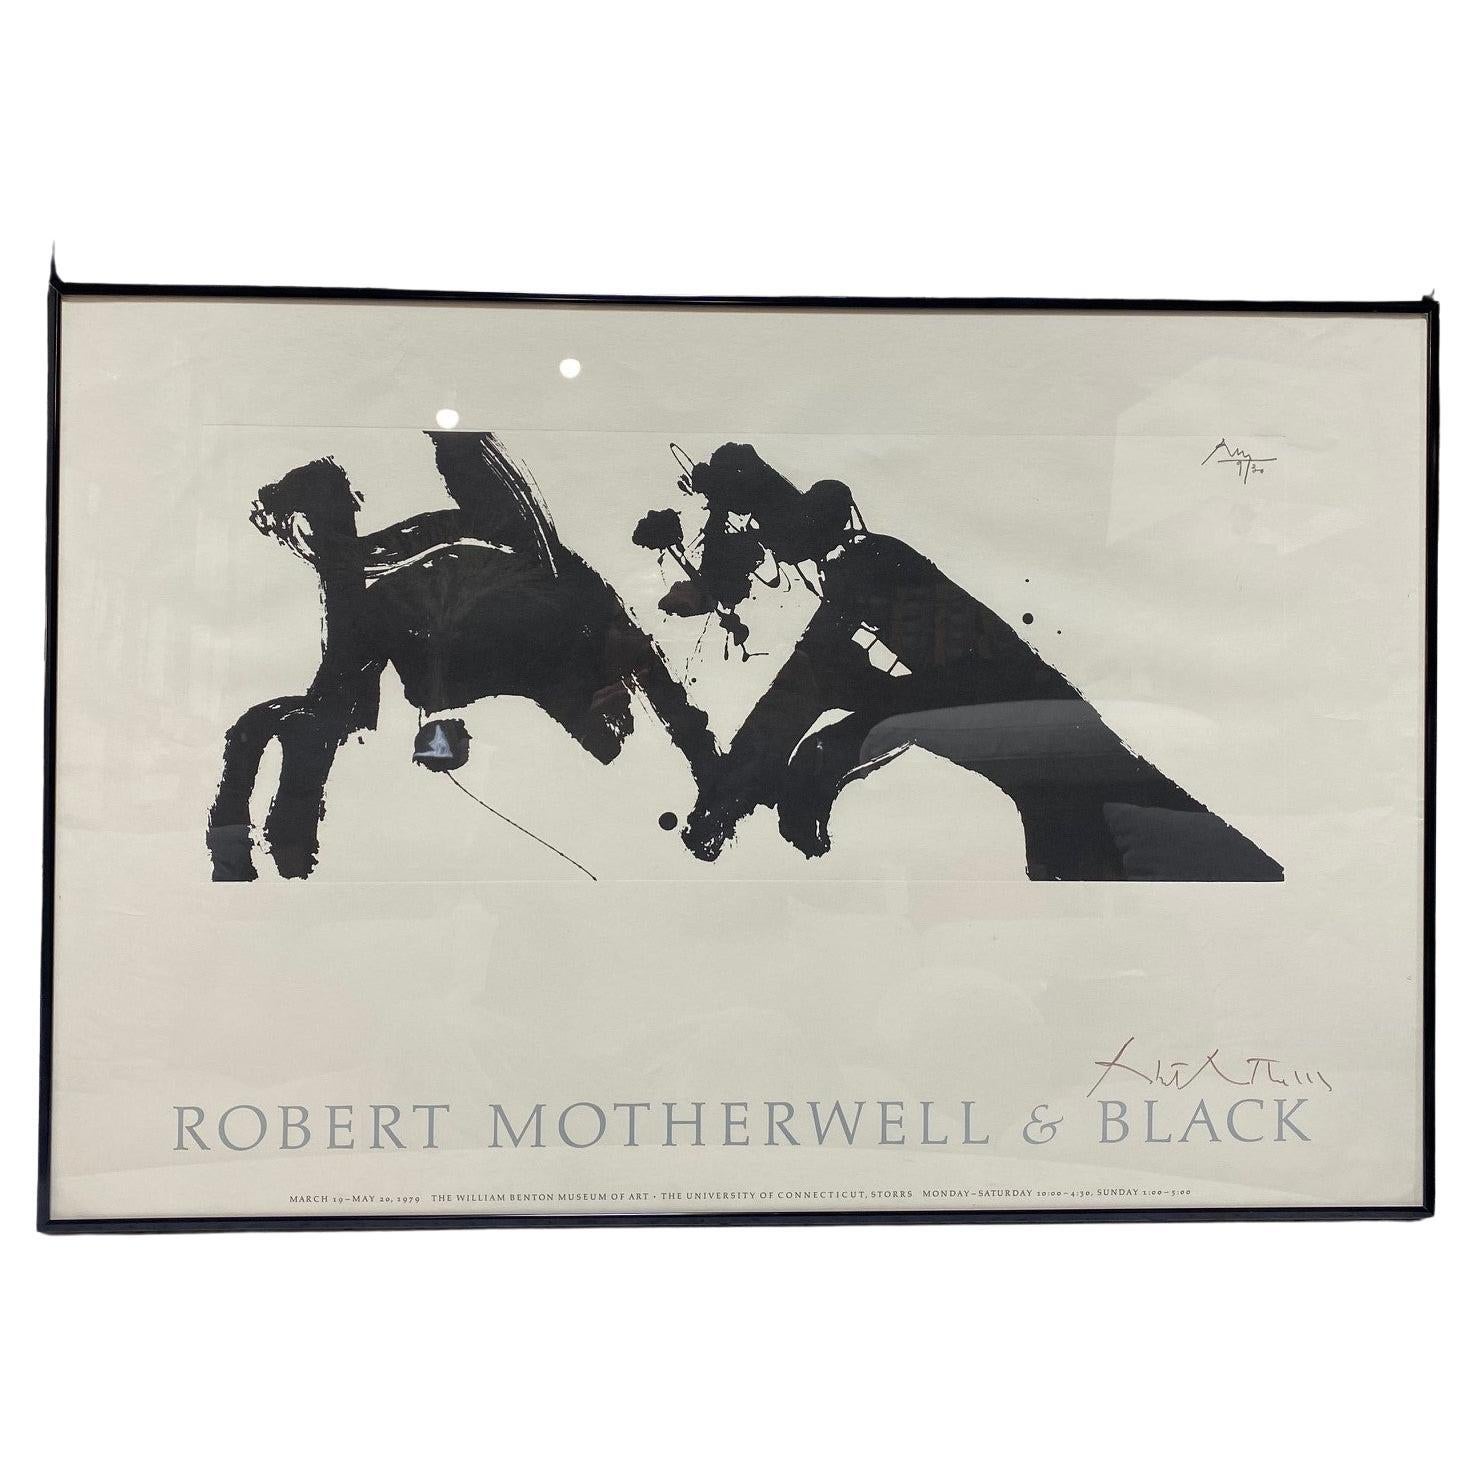 Robert Motherwell Hand Signed Exhibition & Black Lithograph Poster Dance I, 1979 For Sale